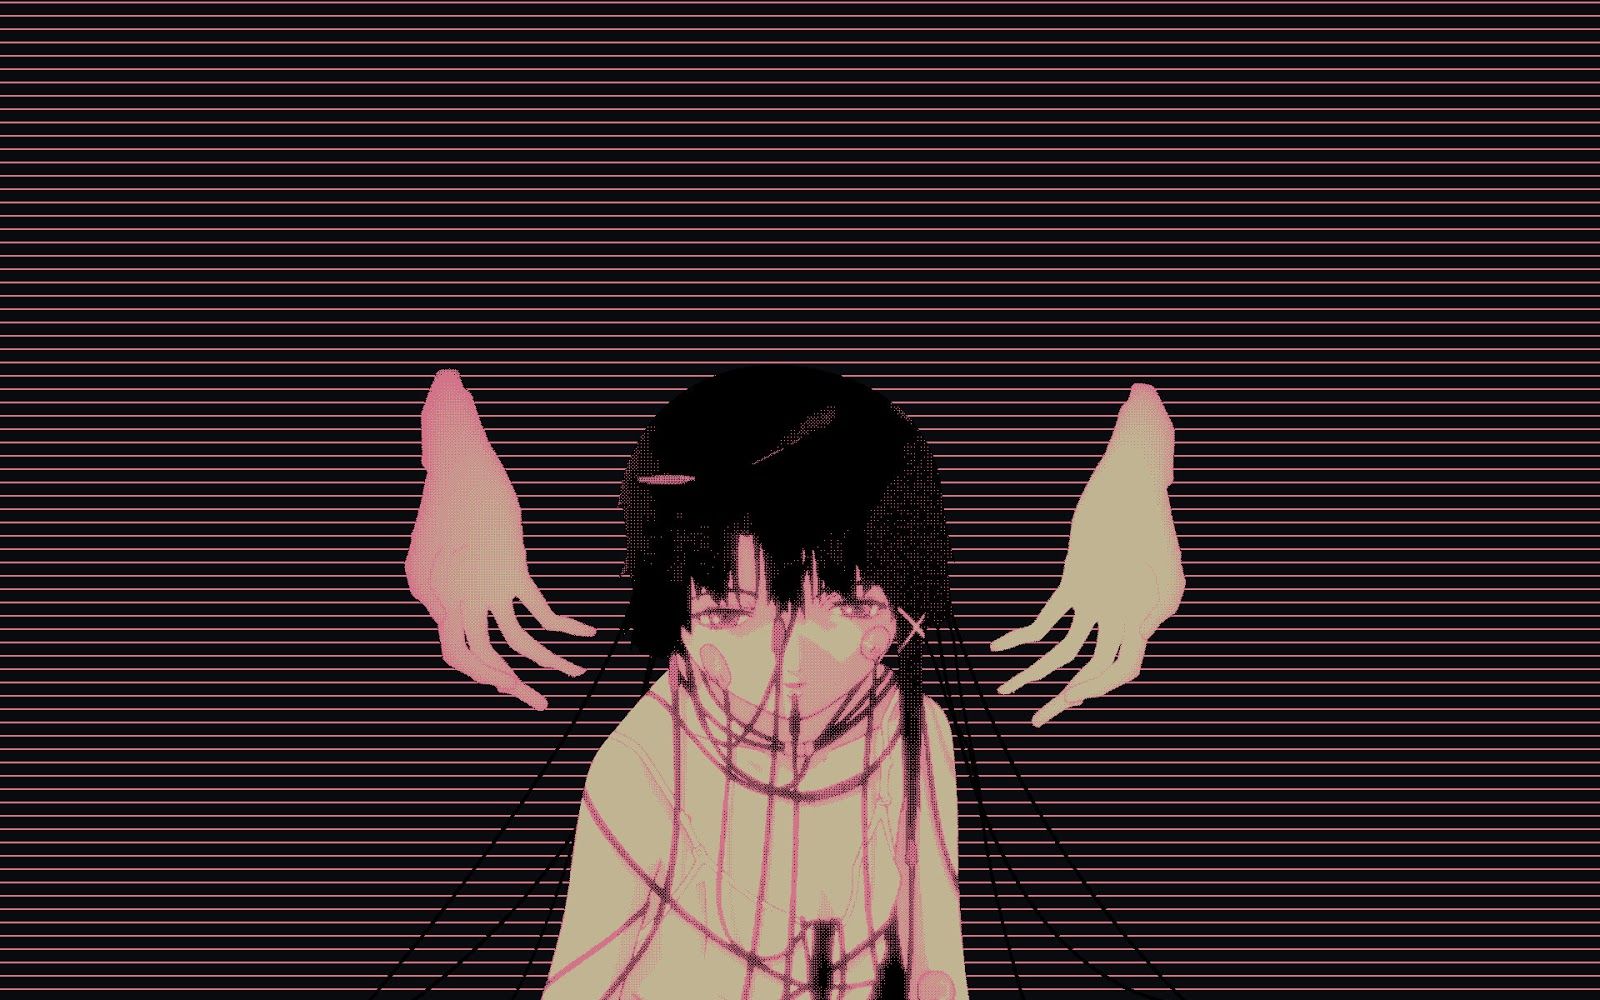 Serial Experiments Lain Wallpapers Wallpaper Cave